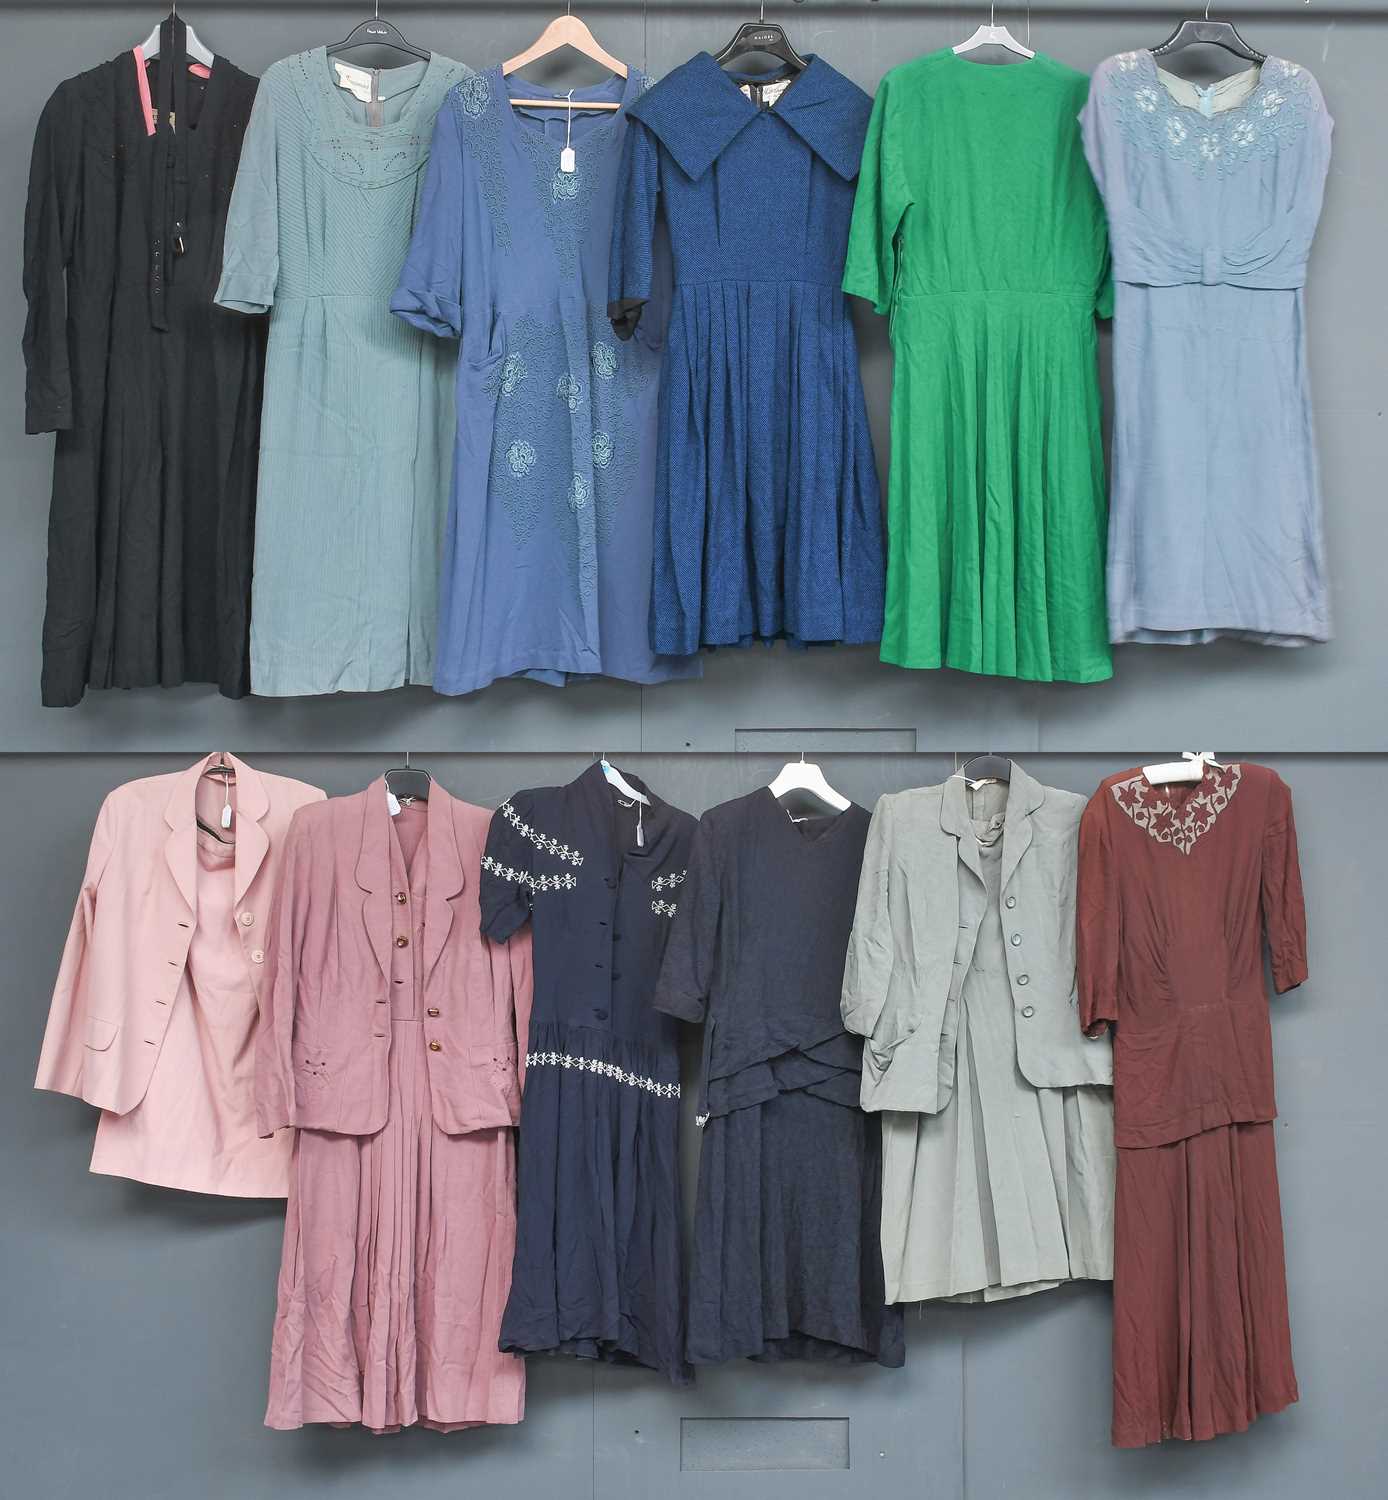 Circa 1940-50s Dresses, comprising a Nettie Vogue blue and black striped wool dress with three